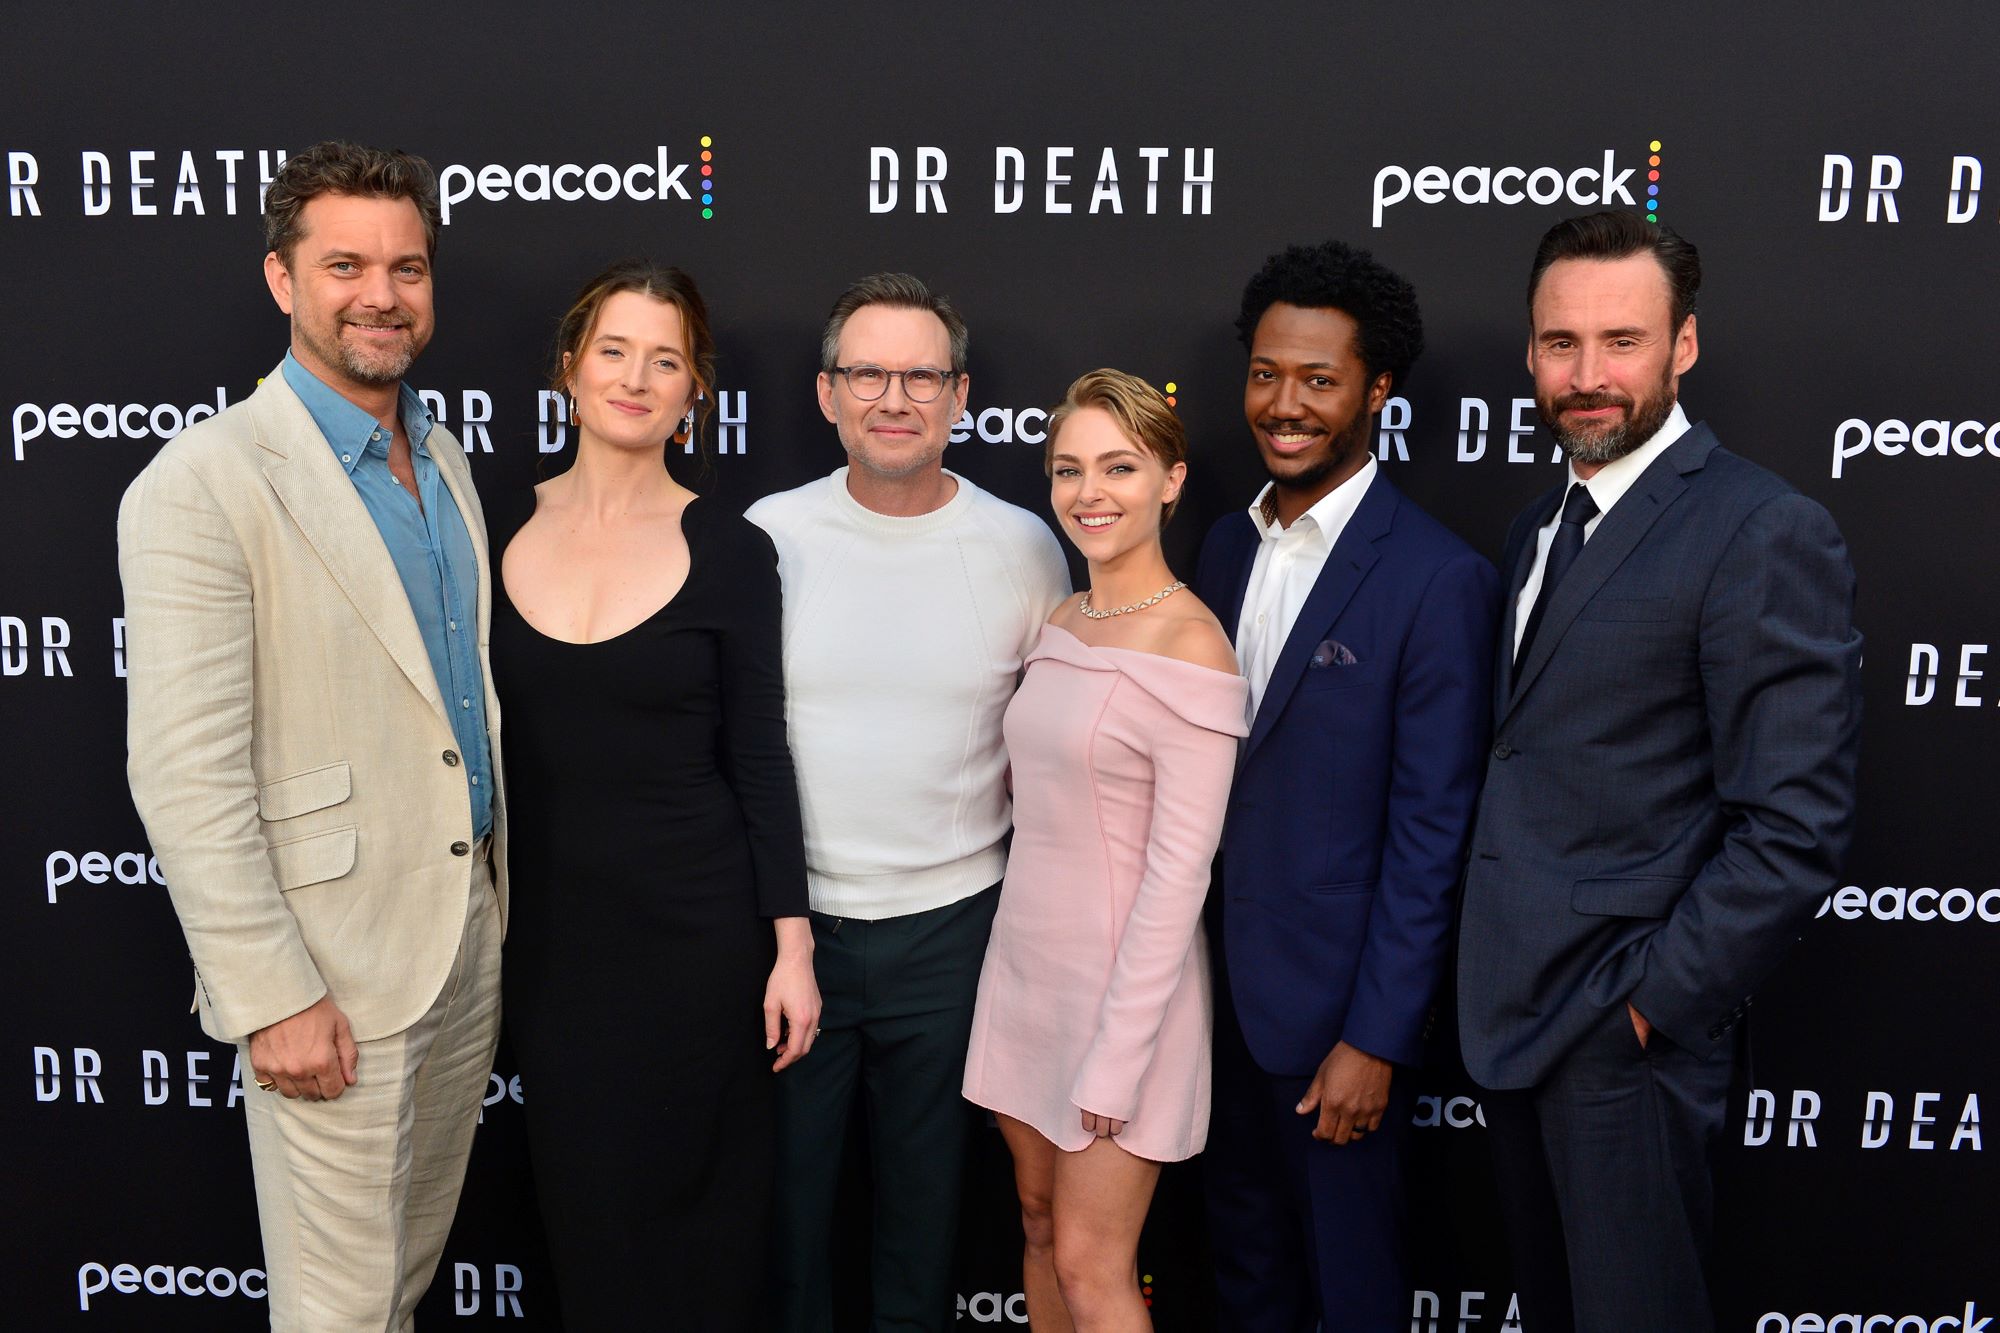 Six members of the cast of Dr. Death professionally dressed standing in front of a black background with Dr. Death and peacock written on it.